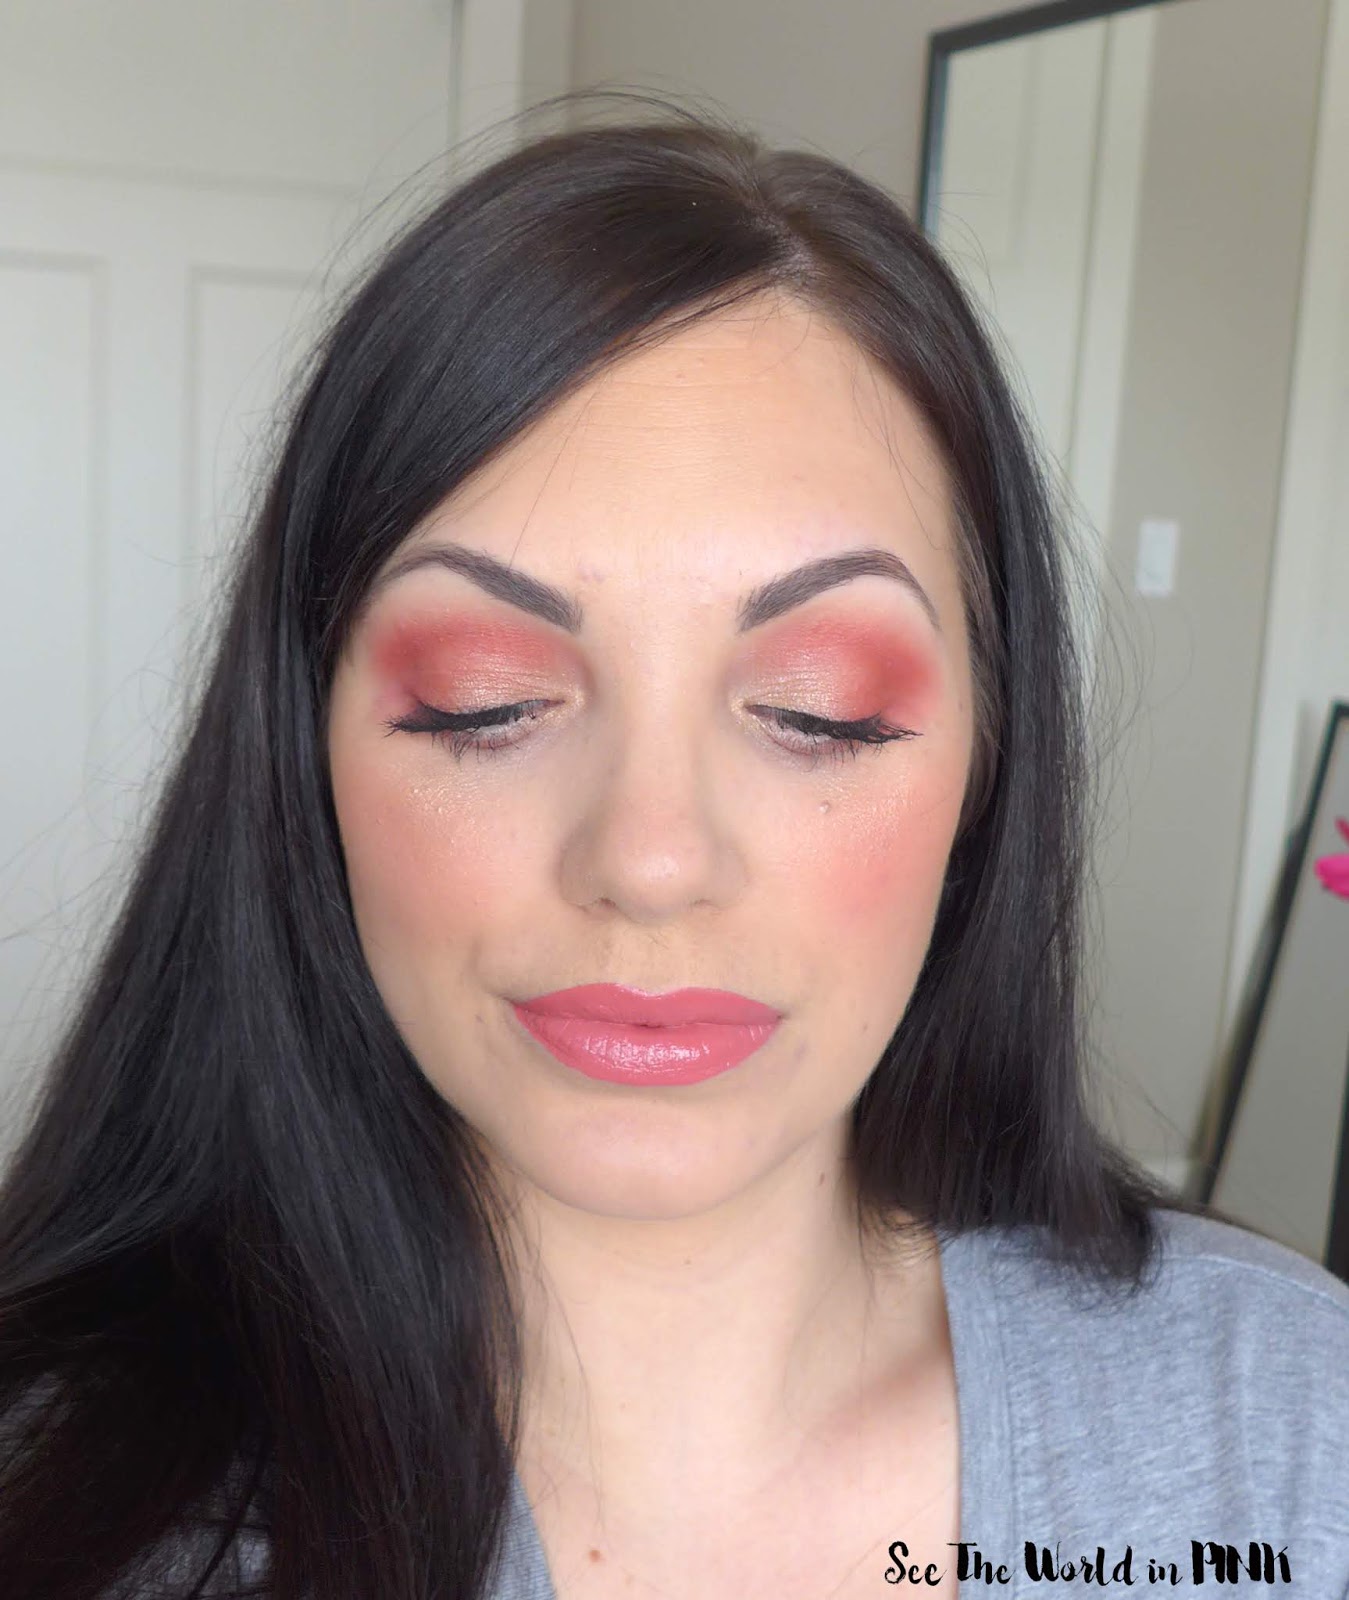 March Shop My Stash - Colour of the Year "Living Coral" Makeup Look